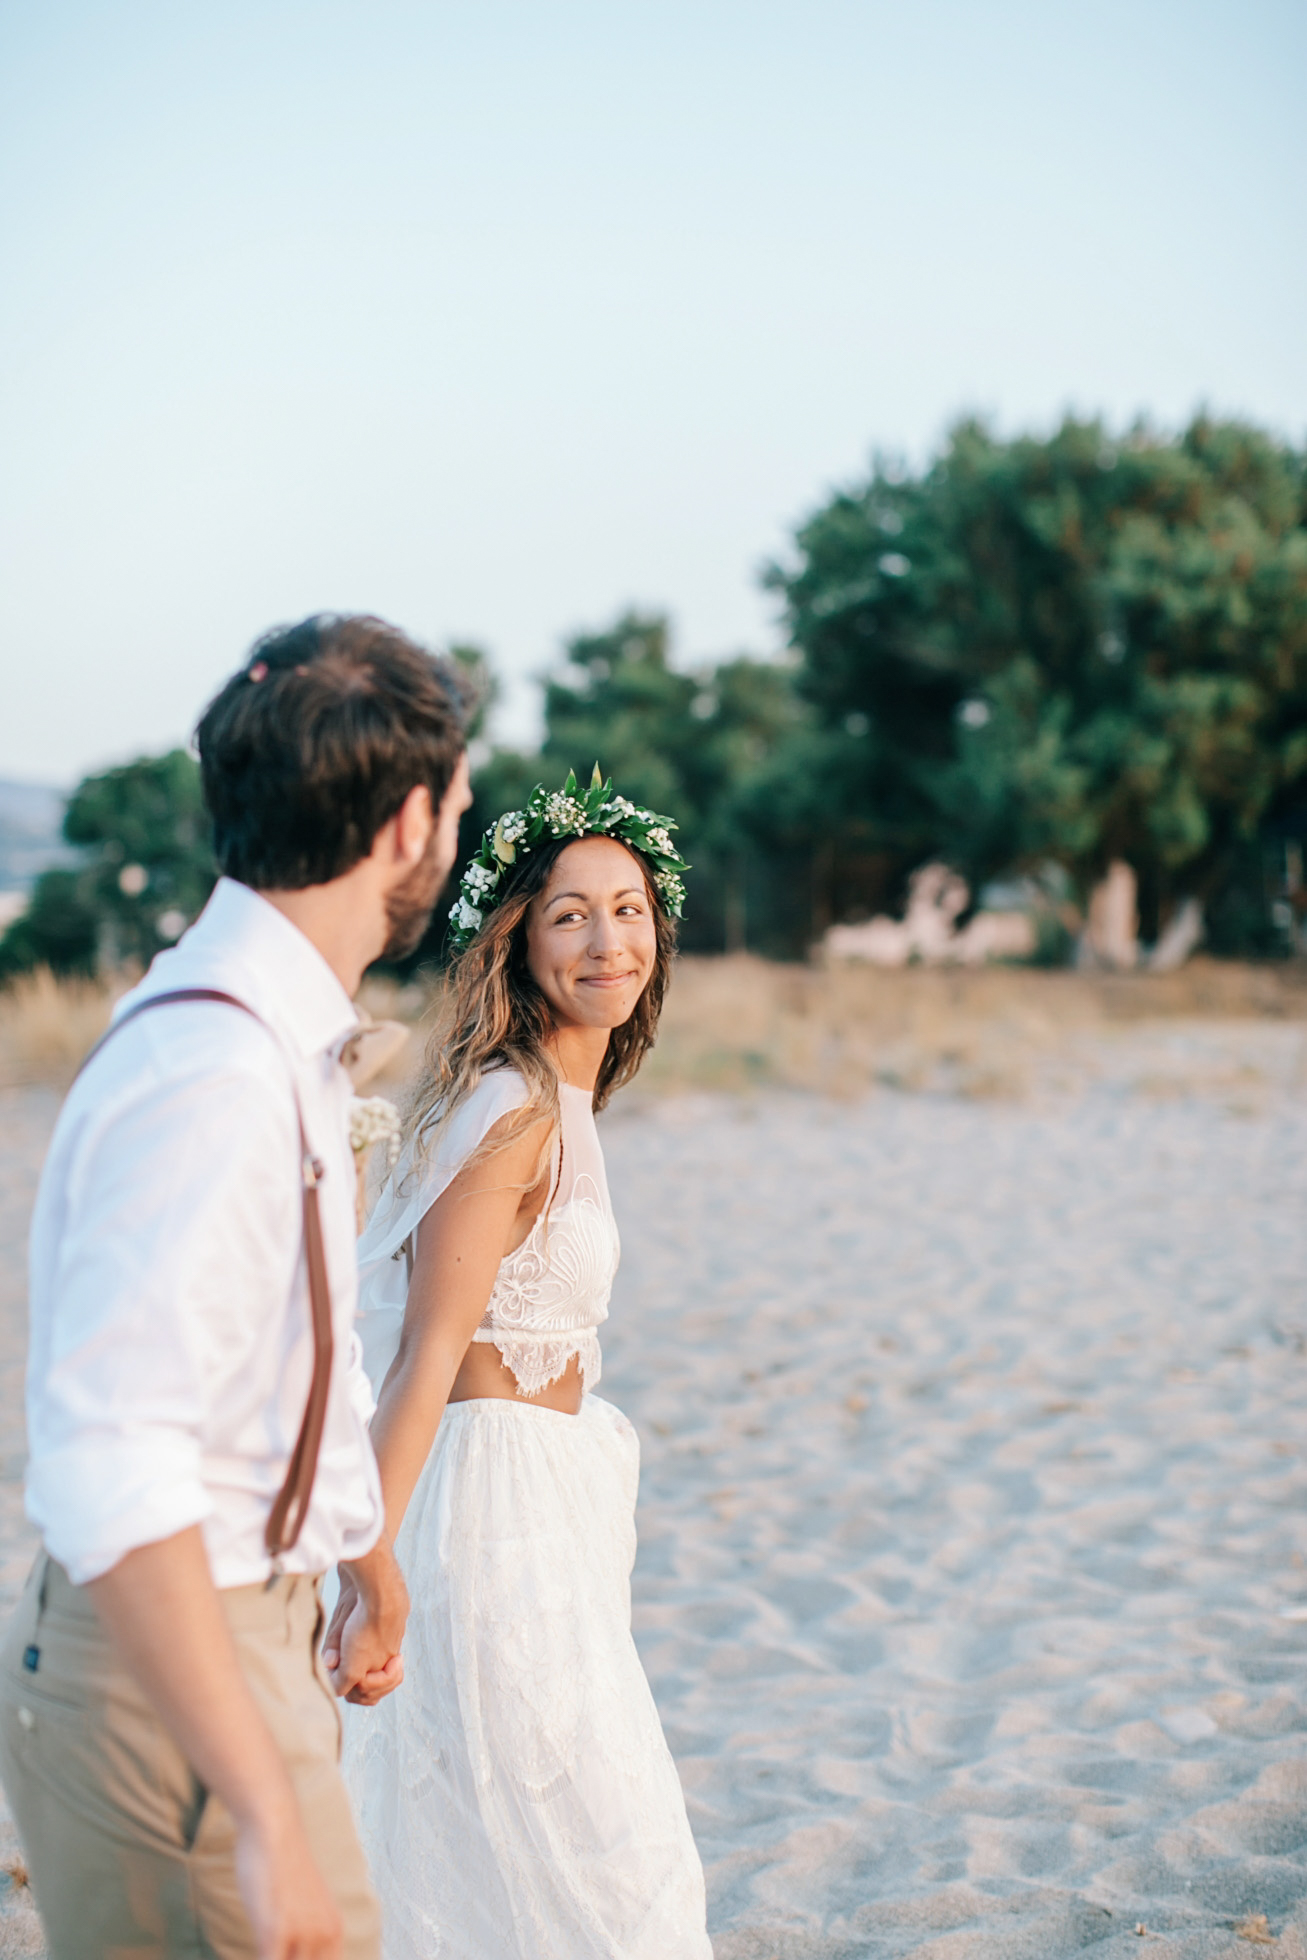 Professional image of bride and groom walking along a sandy beach in Crete after their beach wedding ceremony.